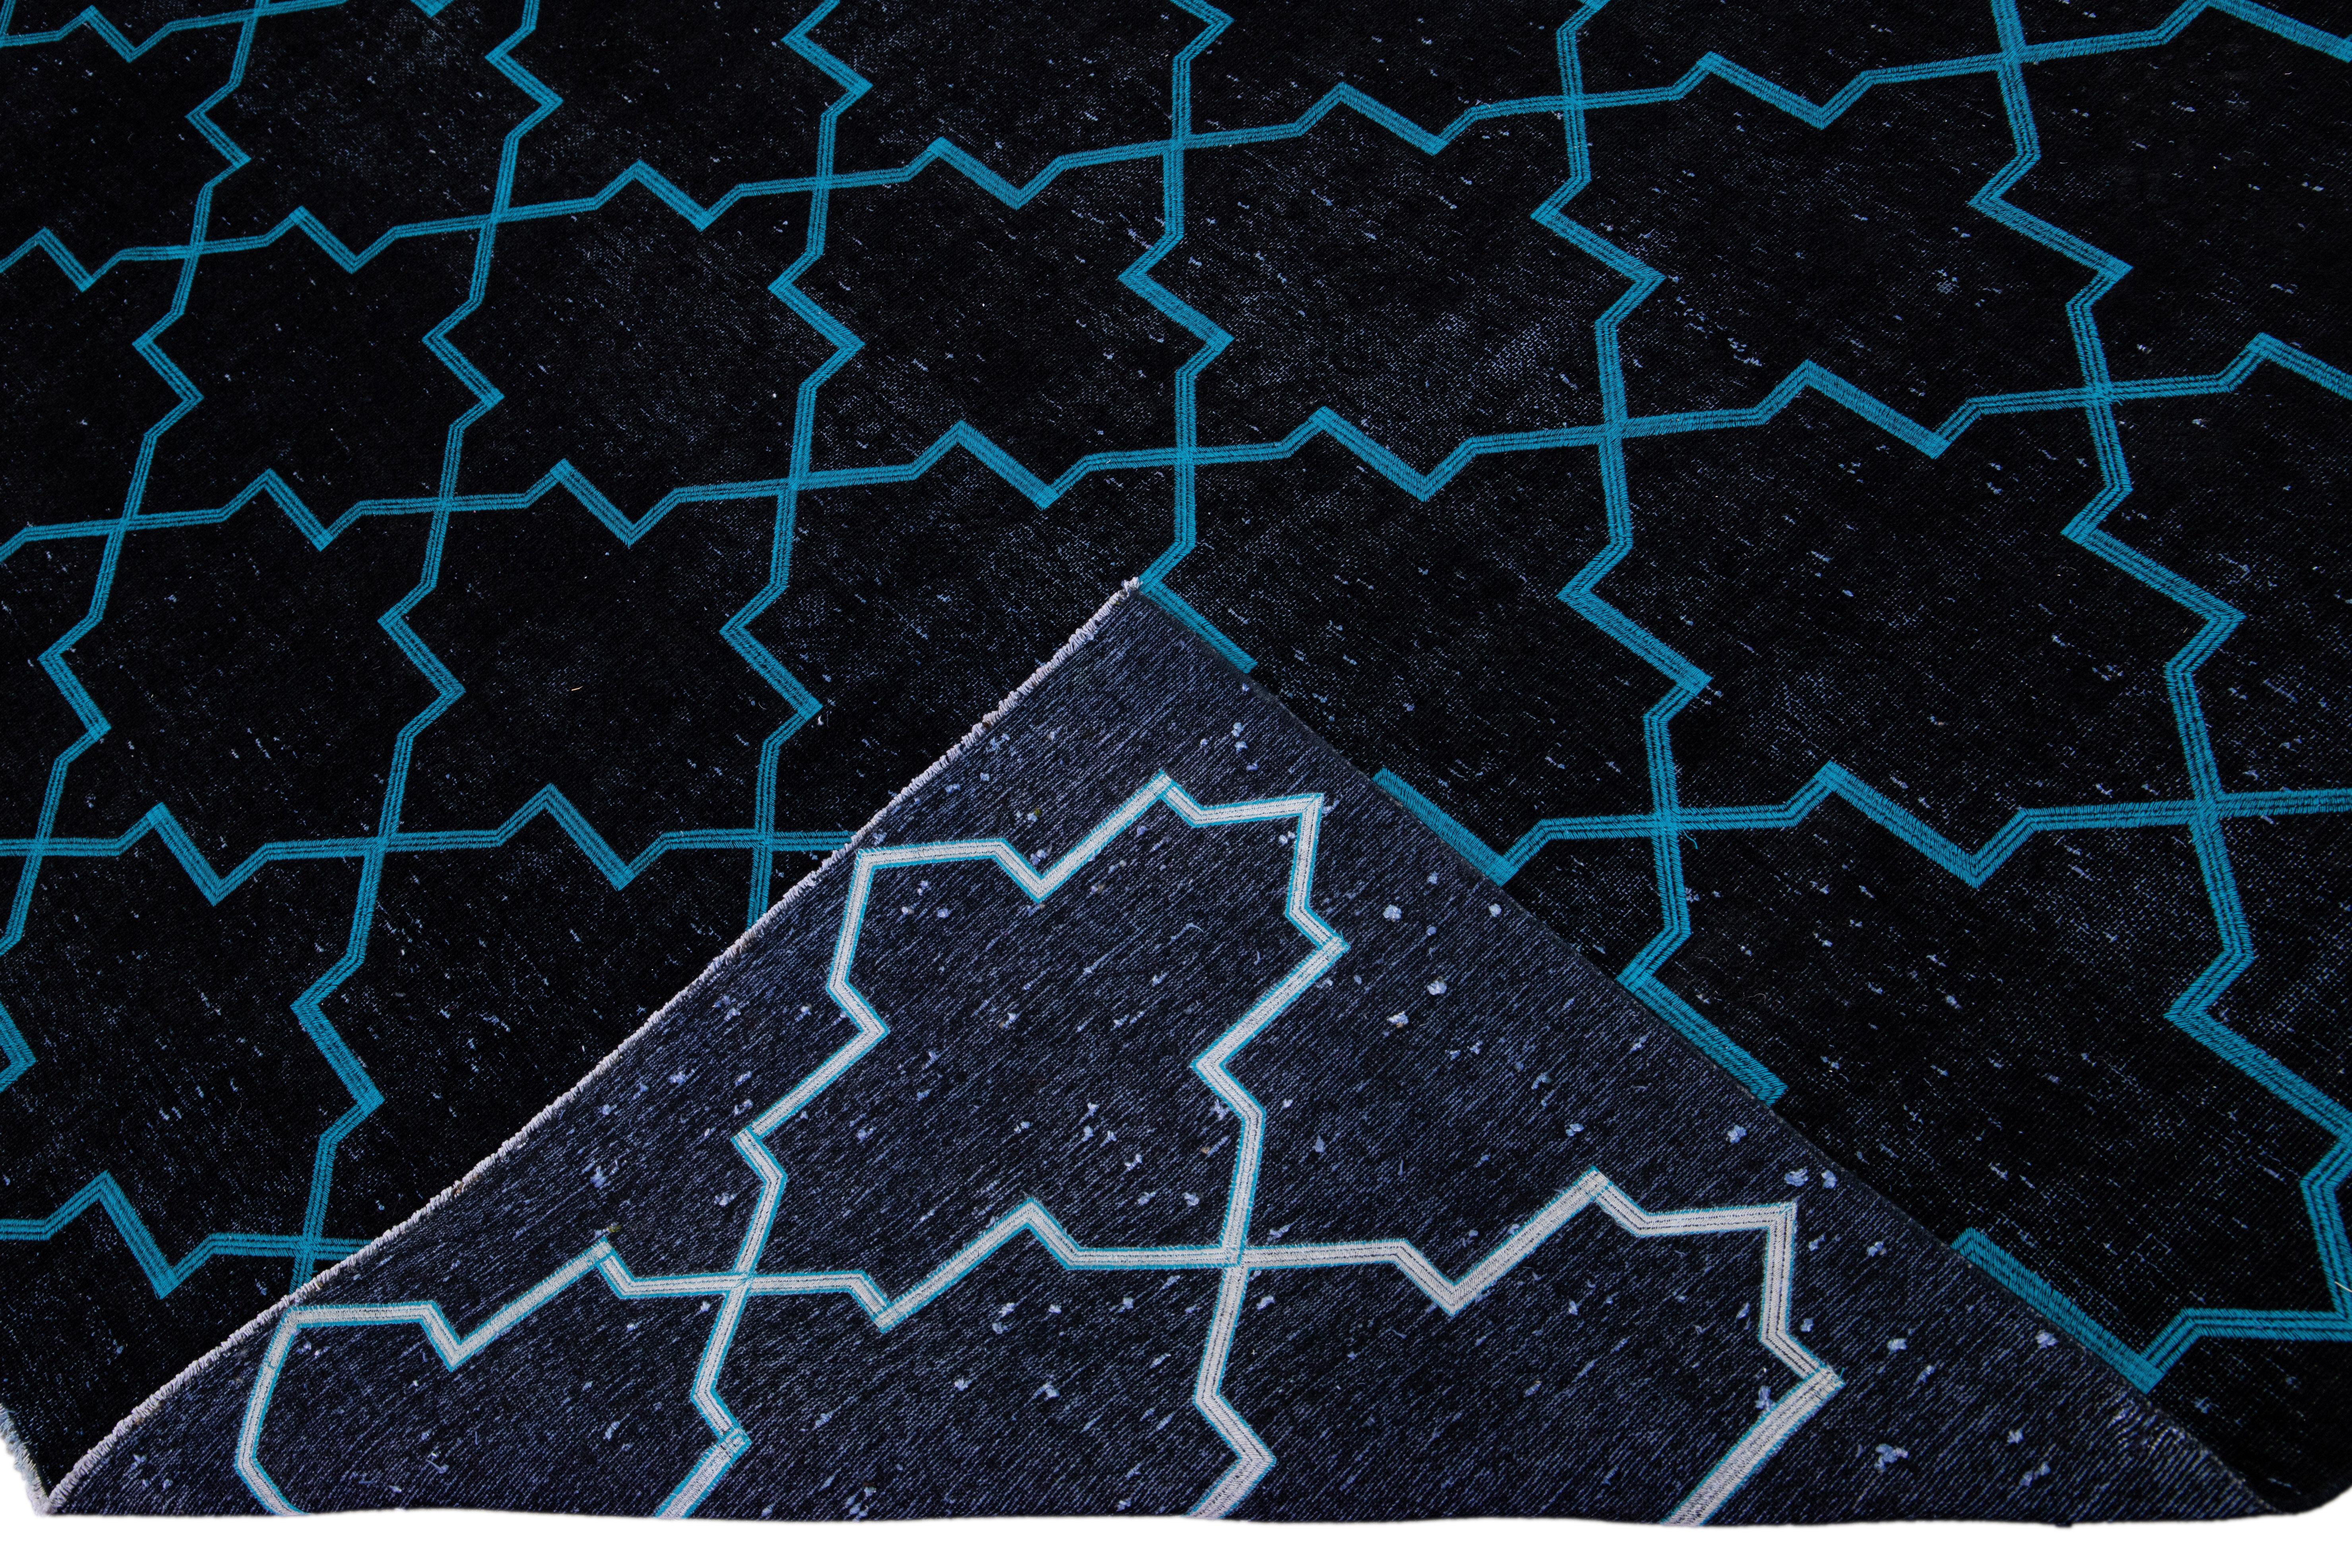 Beautiful Turkish handmade wool rug with a black distress look field. This Modern rug has blue accents featuring a gorgeous all-over geometric trellis pattern design.

This rug measures: 9'7